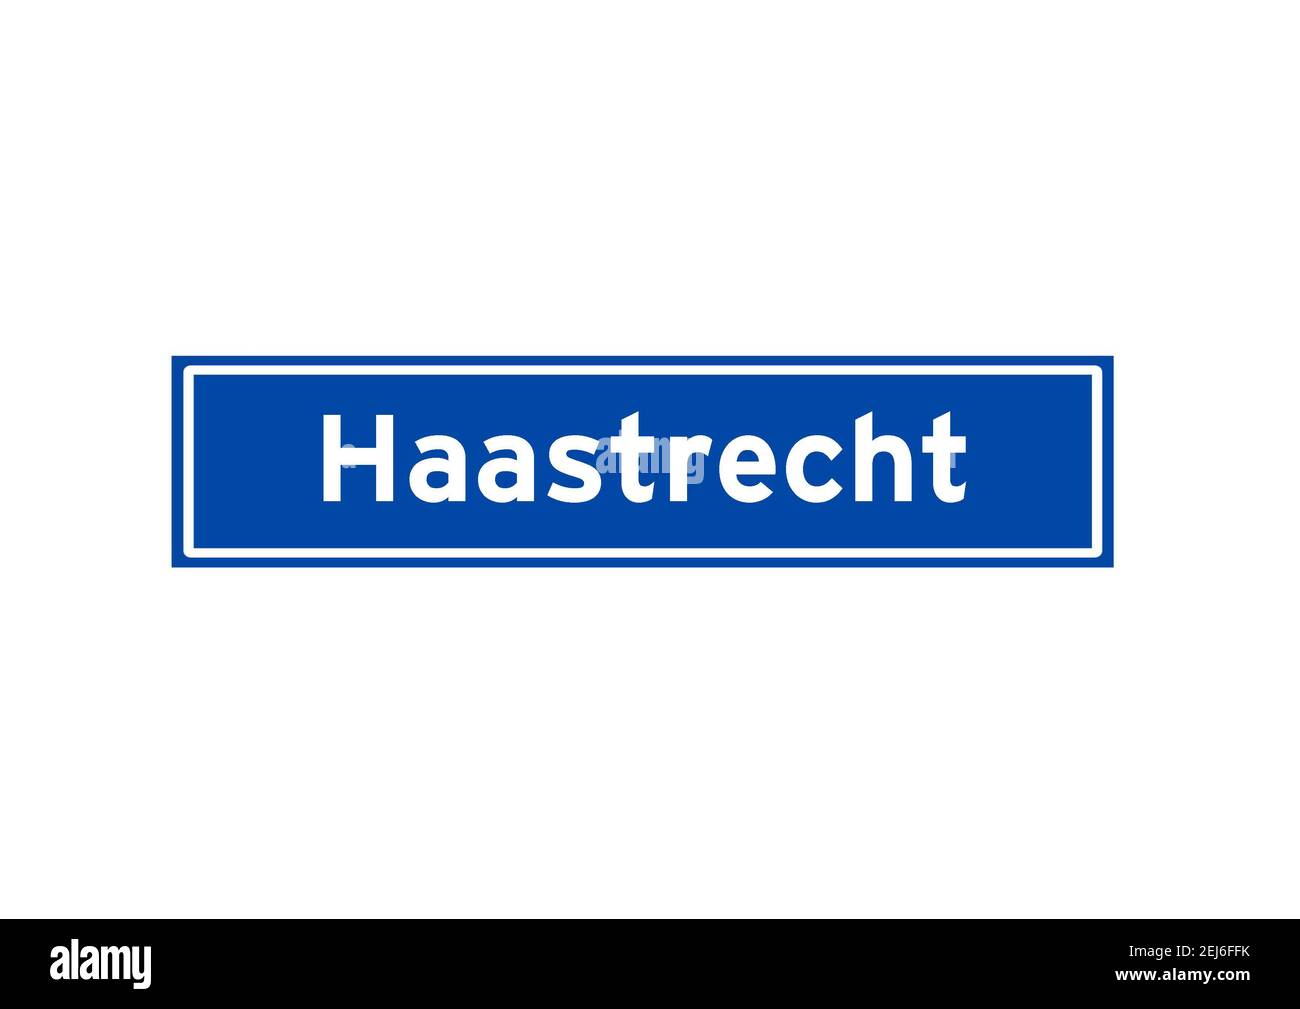 Haastrecht isolated Dutch place name sign. City sign from the Netherlands. Stock Photo